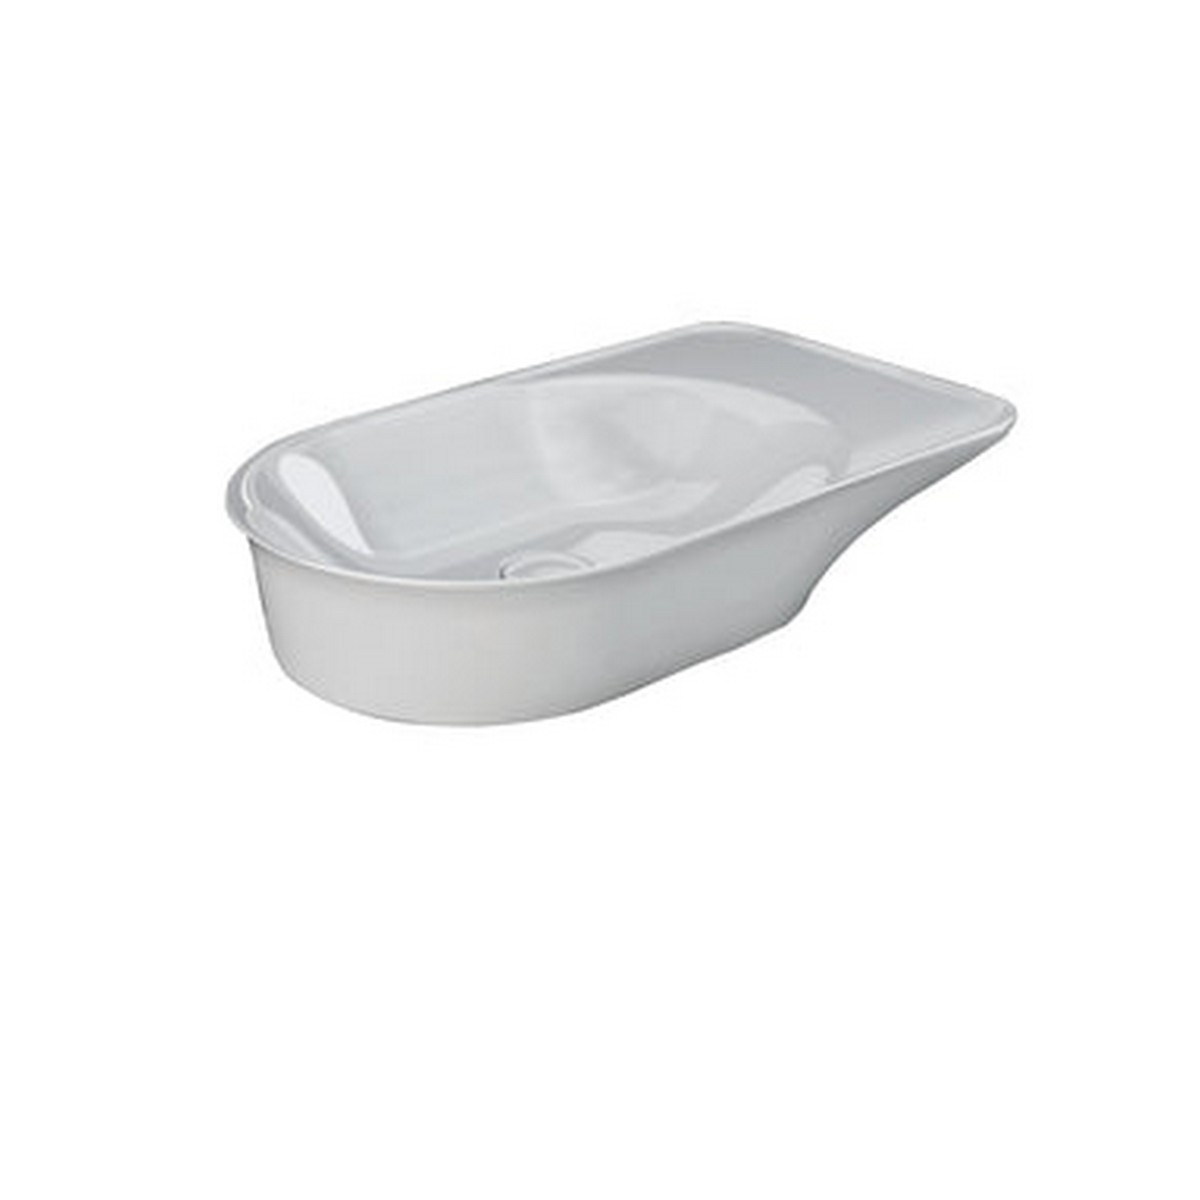 BARCLAY 5-411WH 25 1/2 INCH VITREOUS CHINA VESSEL BATHROOM SINK